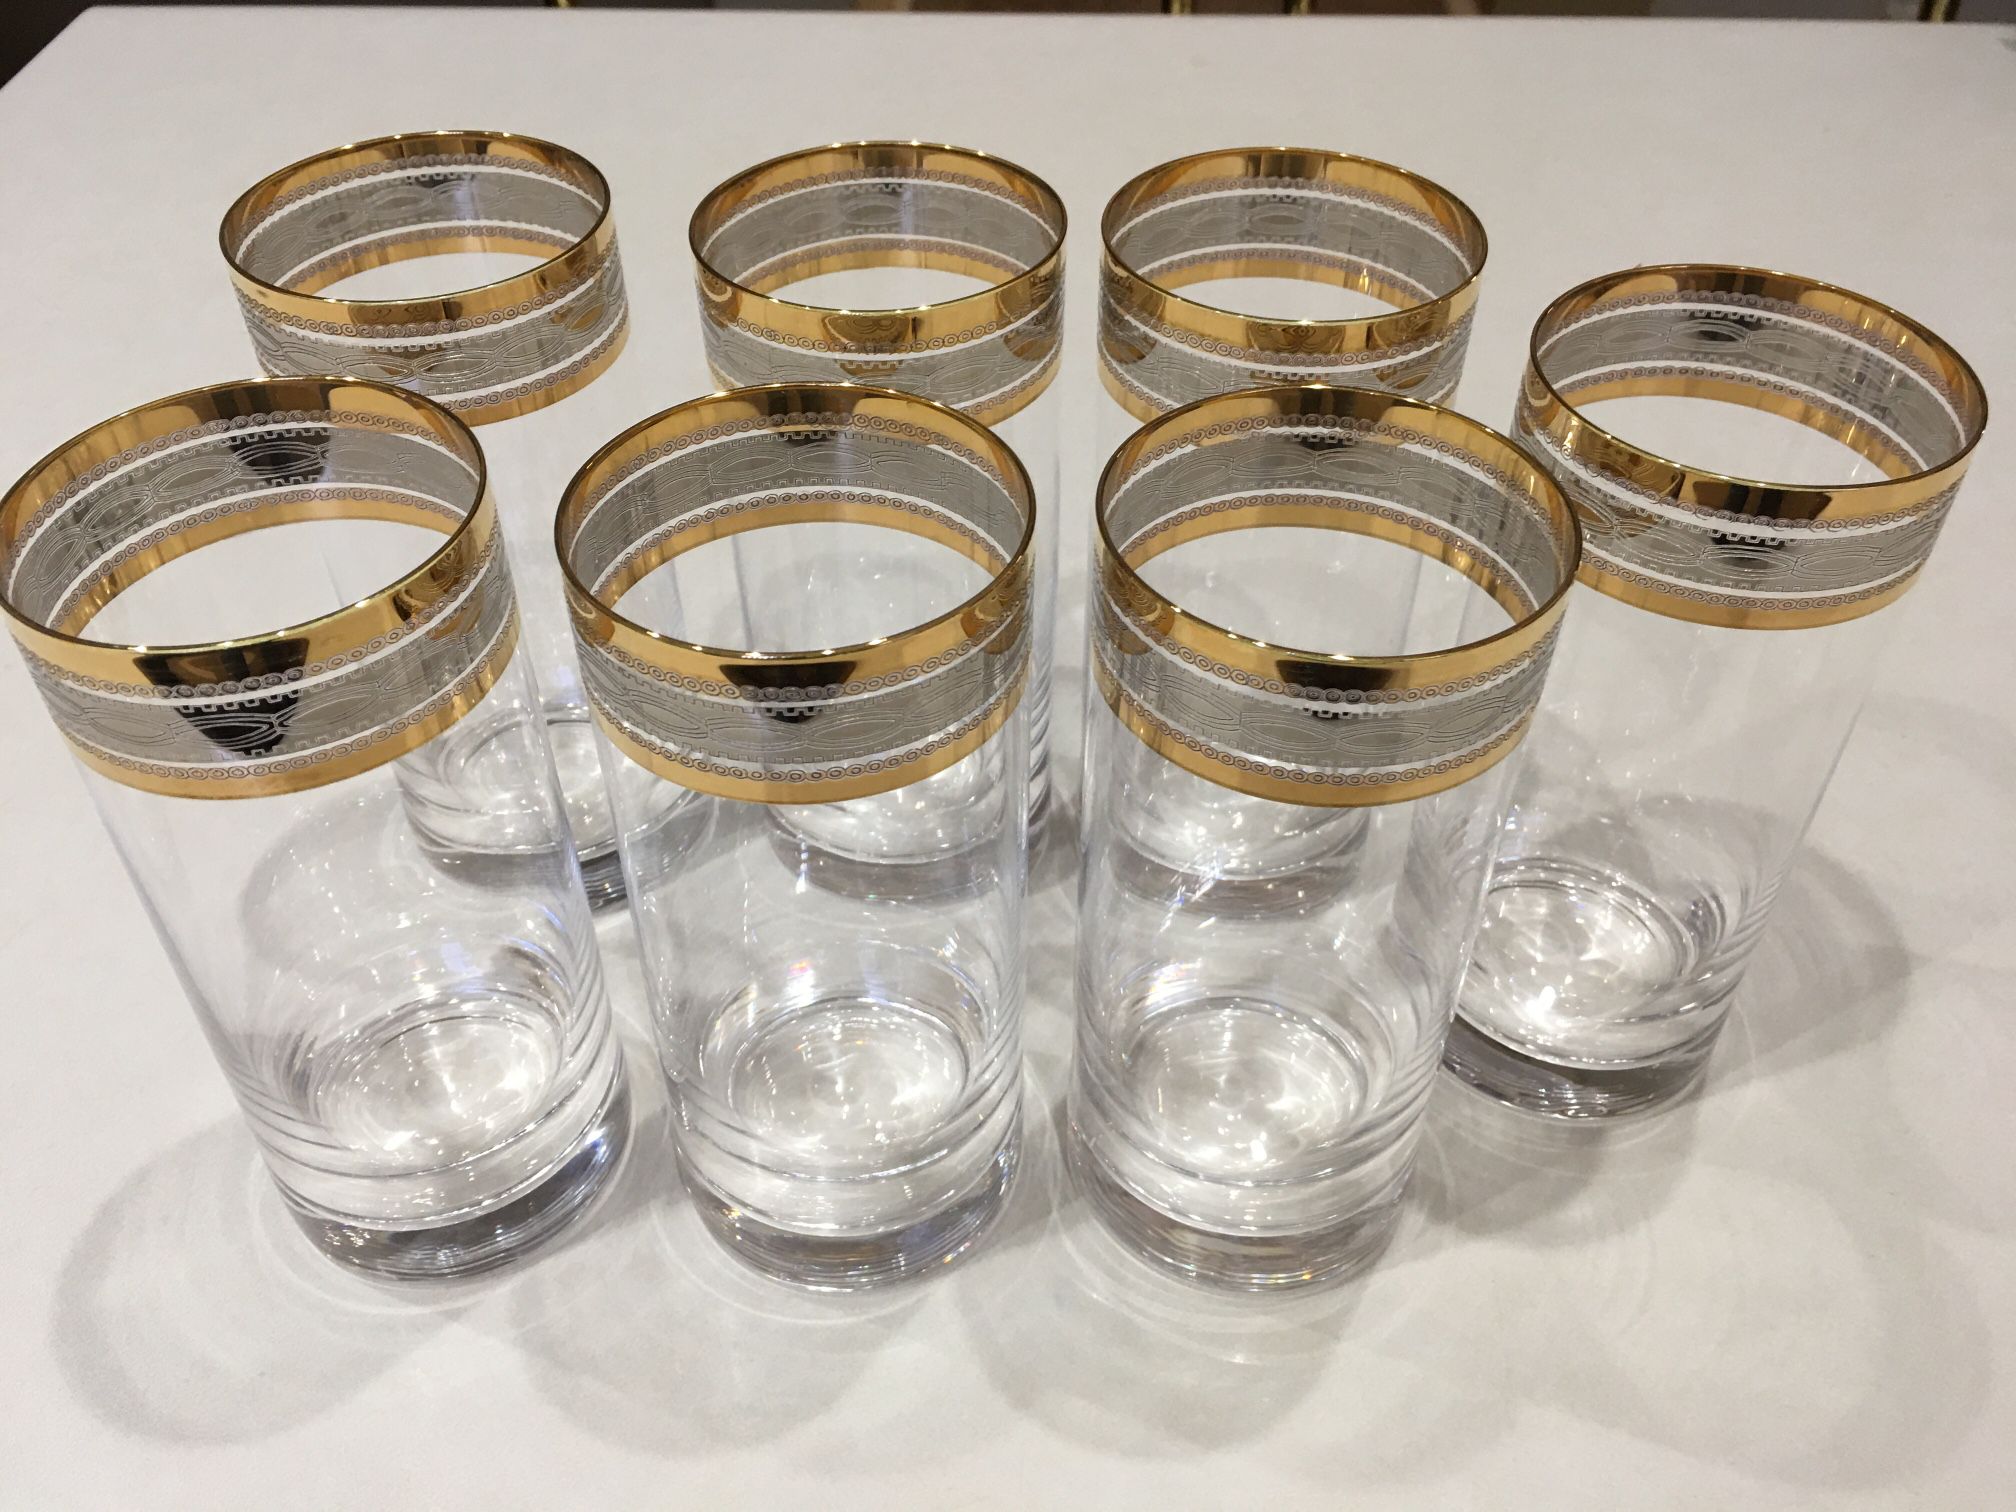 Drinking Glasses with Gold Rim Design (7)